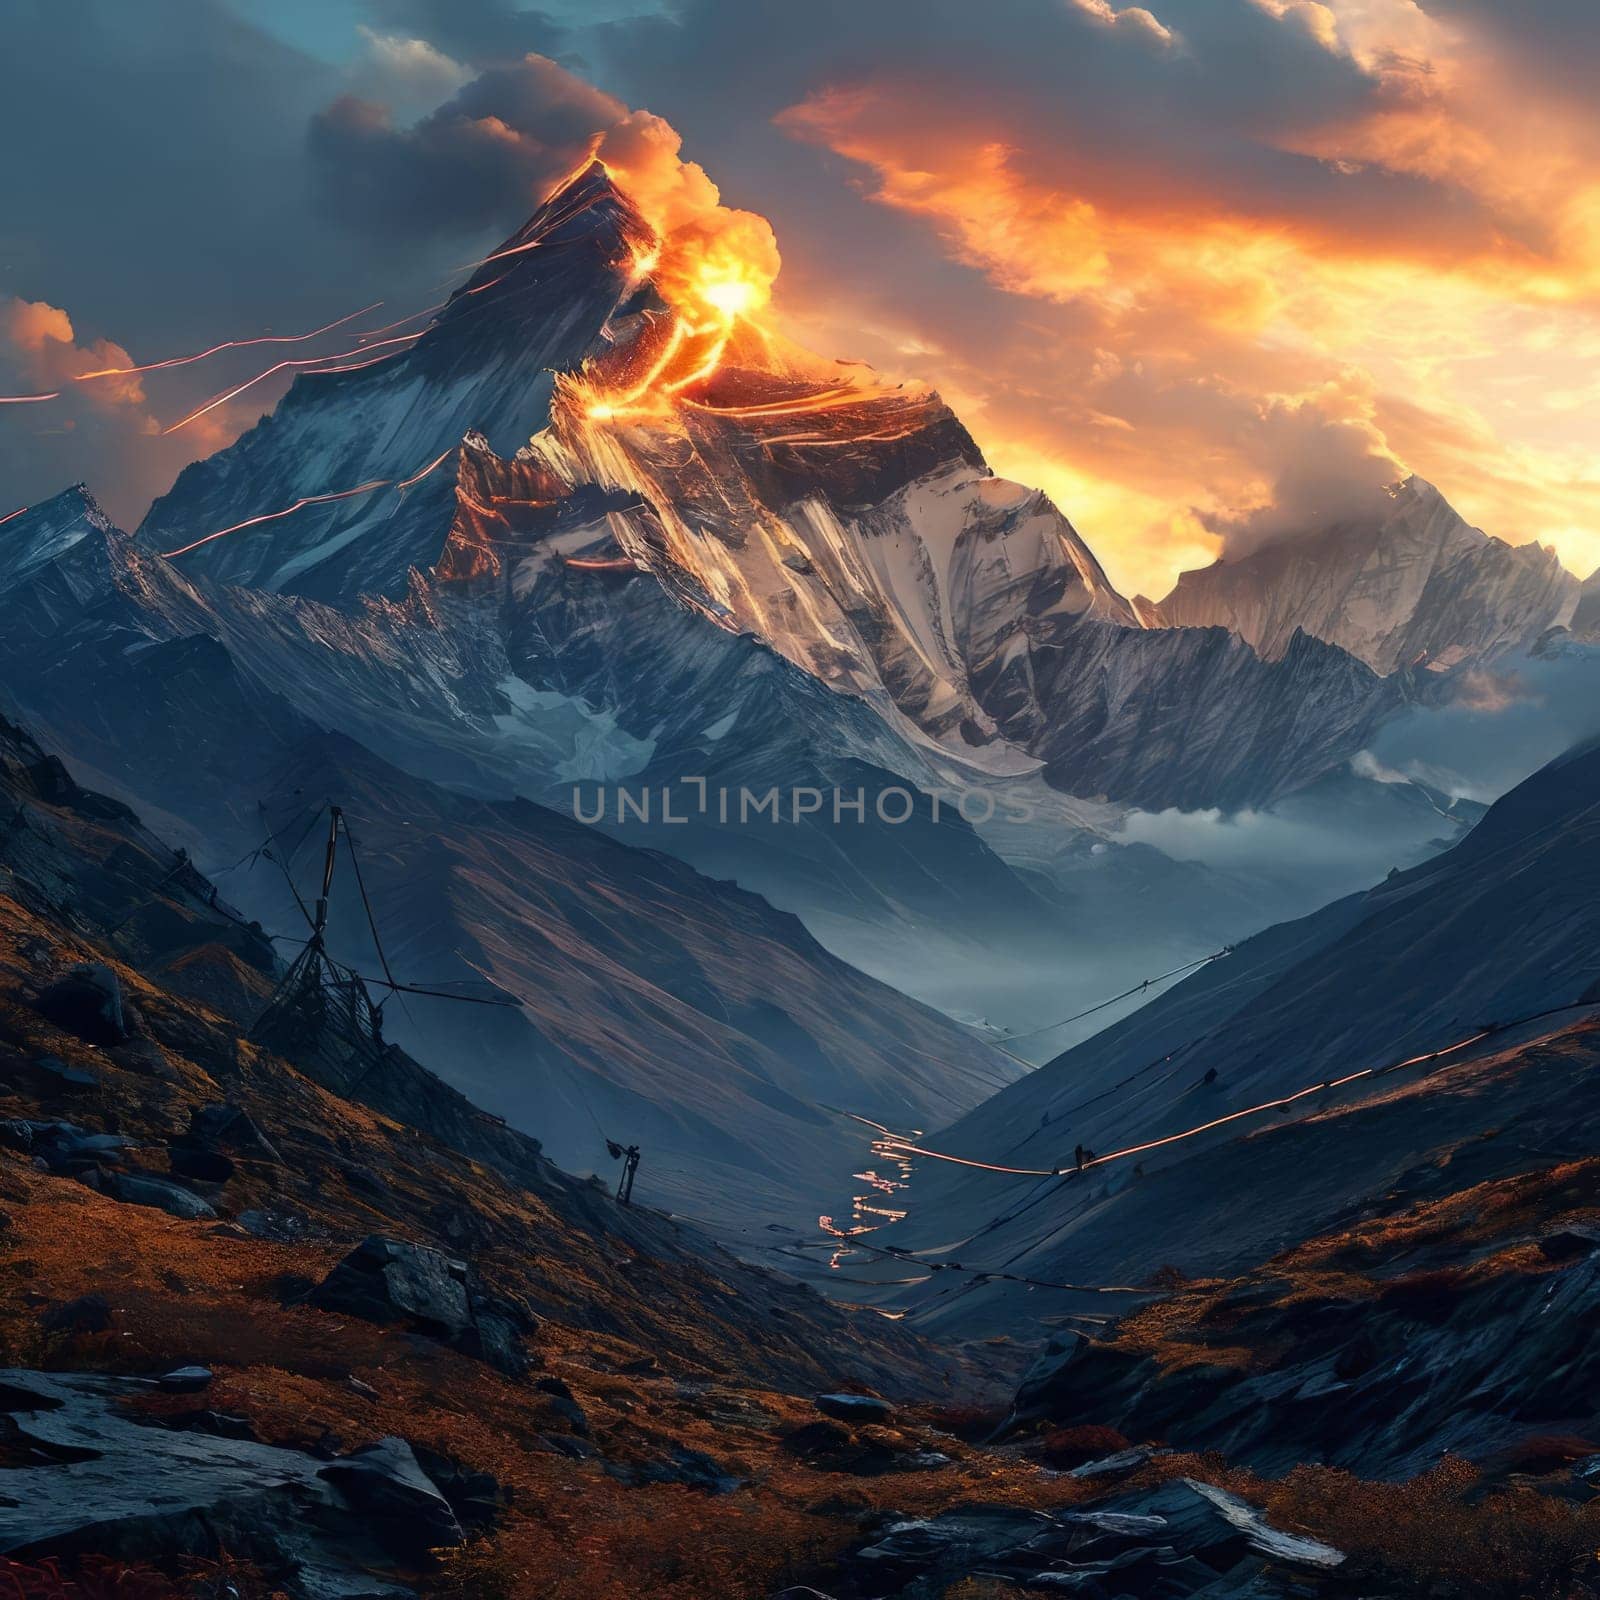 Breathtaking painting capturing serene beauty of majestic mountain bathed in warm hues of sunset. For decorative element in interior design for spaces like homes, offices, hotels, travel brochures